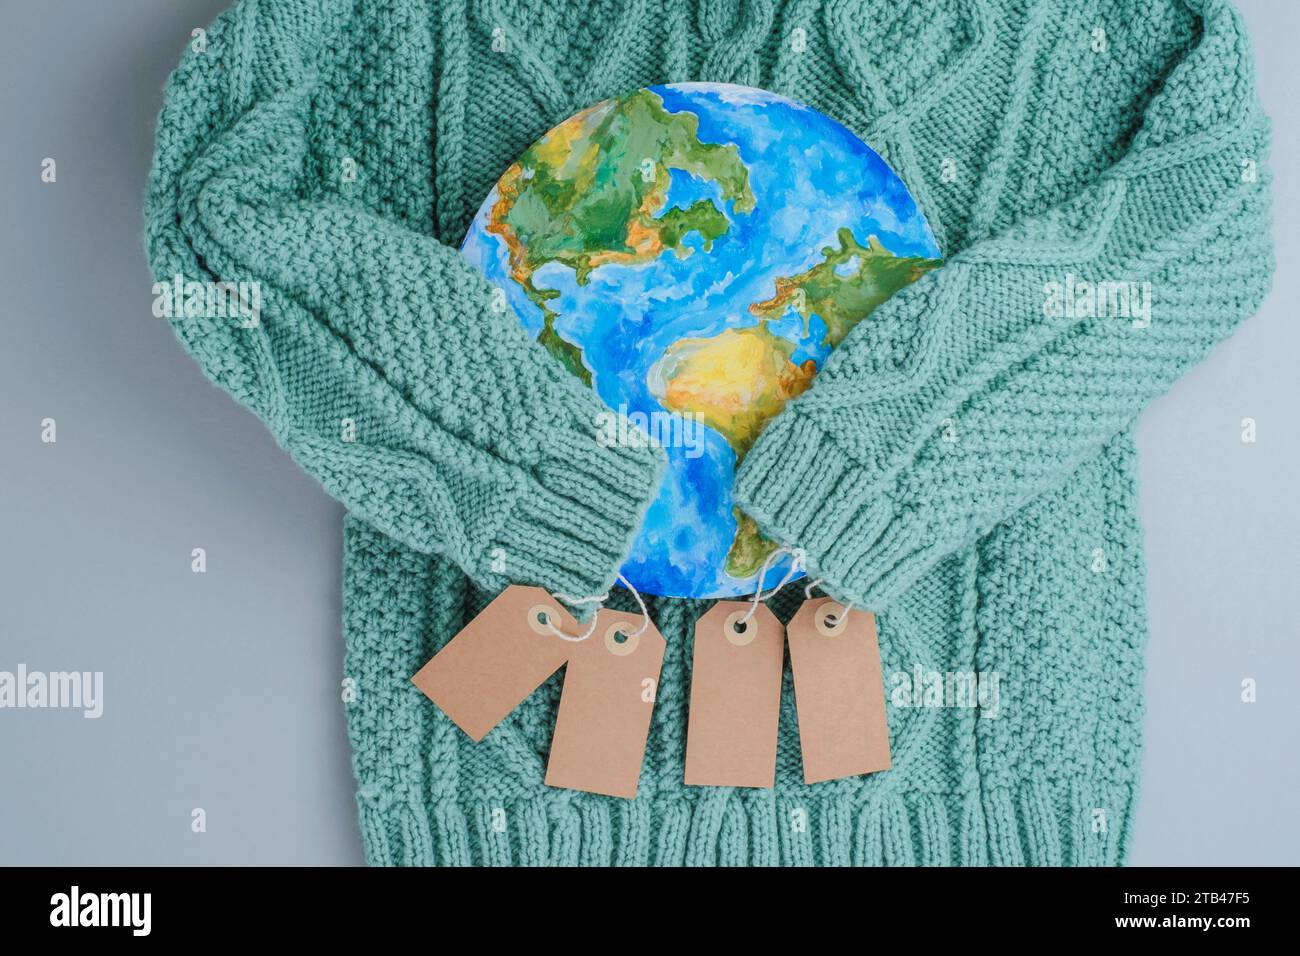 Sleeves of knitwear sweater hug the planet with tags. Responsible consumption clothes. Environmental friendliness and sustainable fashion. Stock Photo